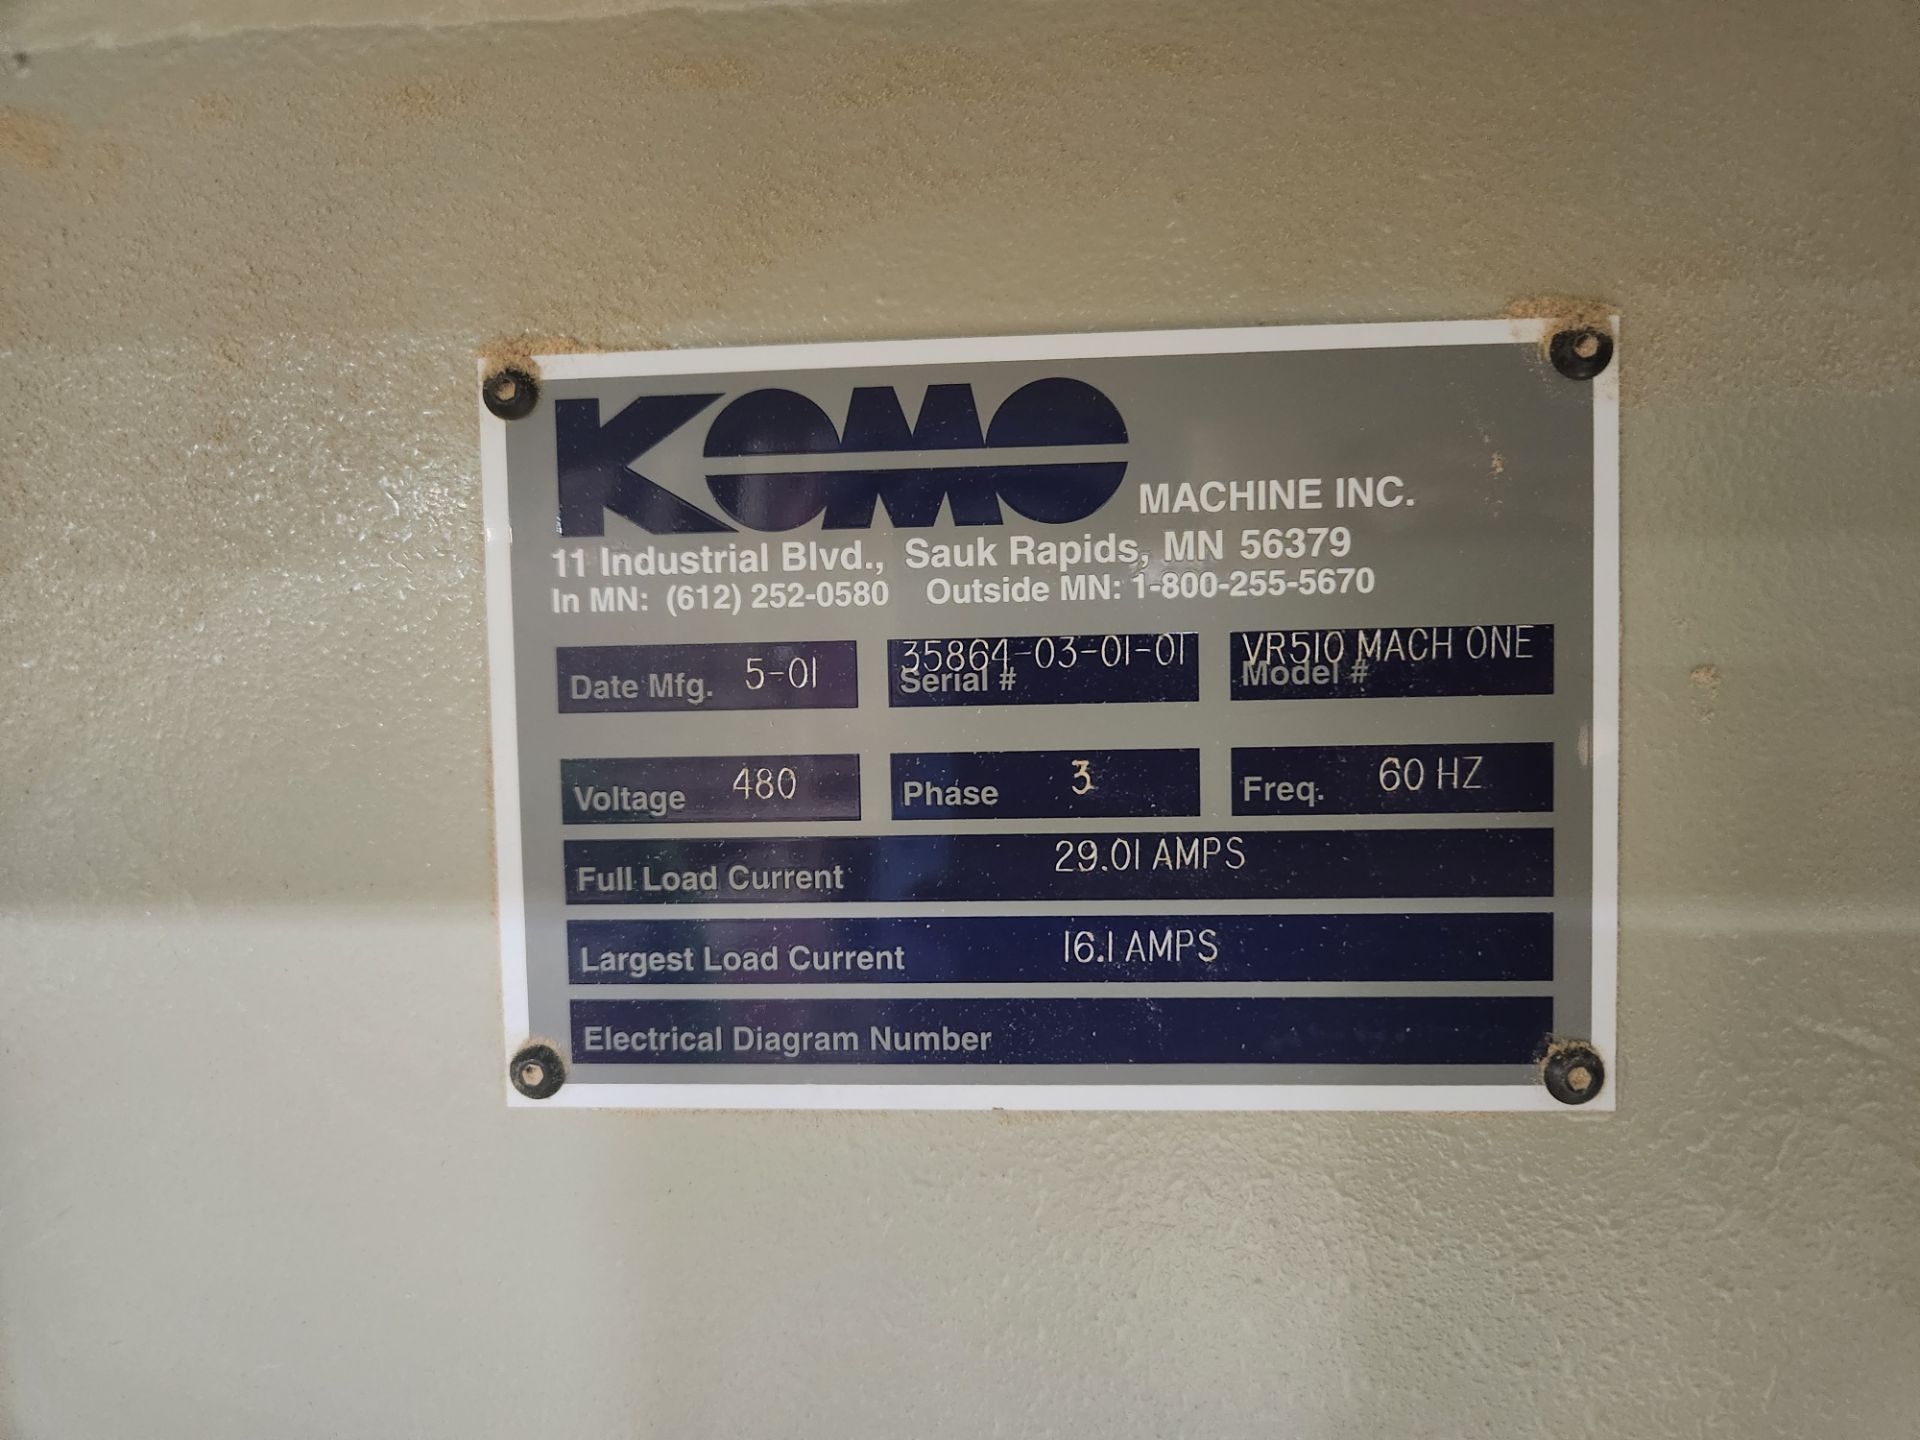 2001 Komo VR 510 Mach One, CNC Router - Image 12 of 12